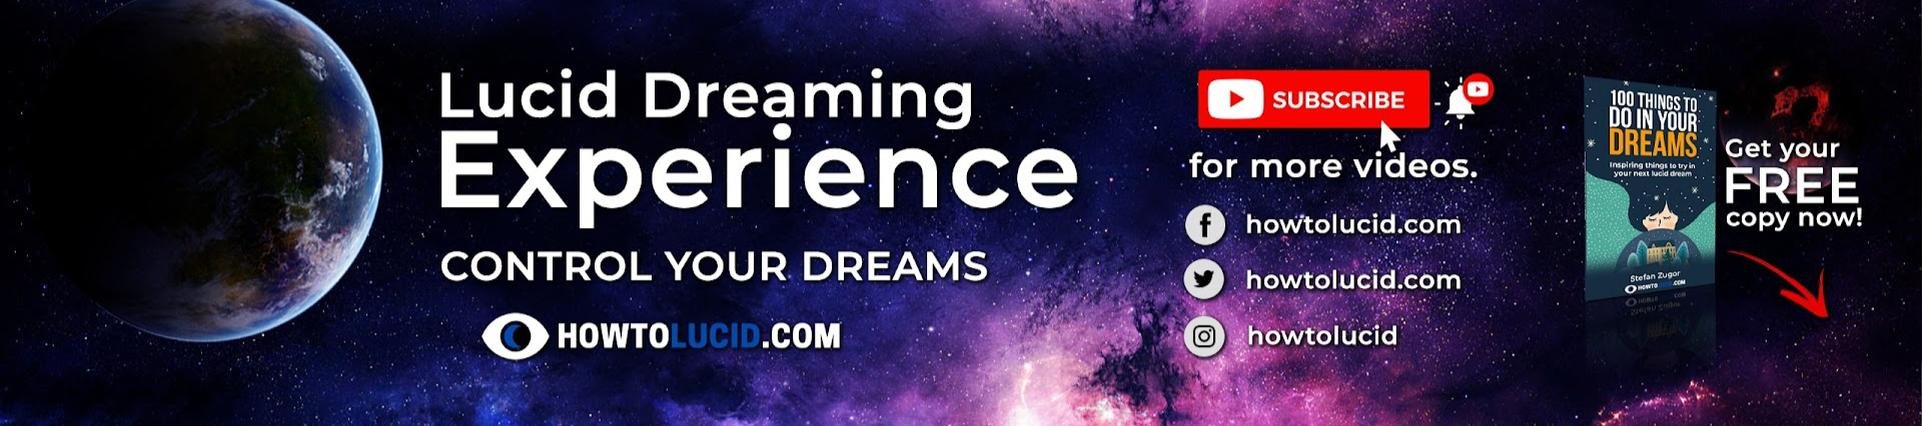 Lucid Dreaming Experience